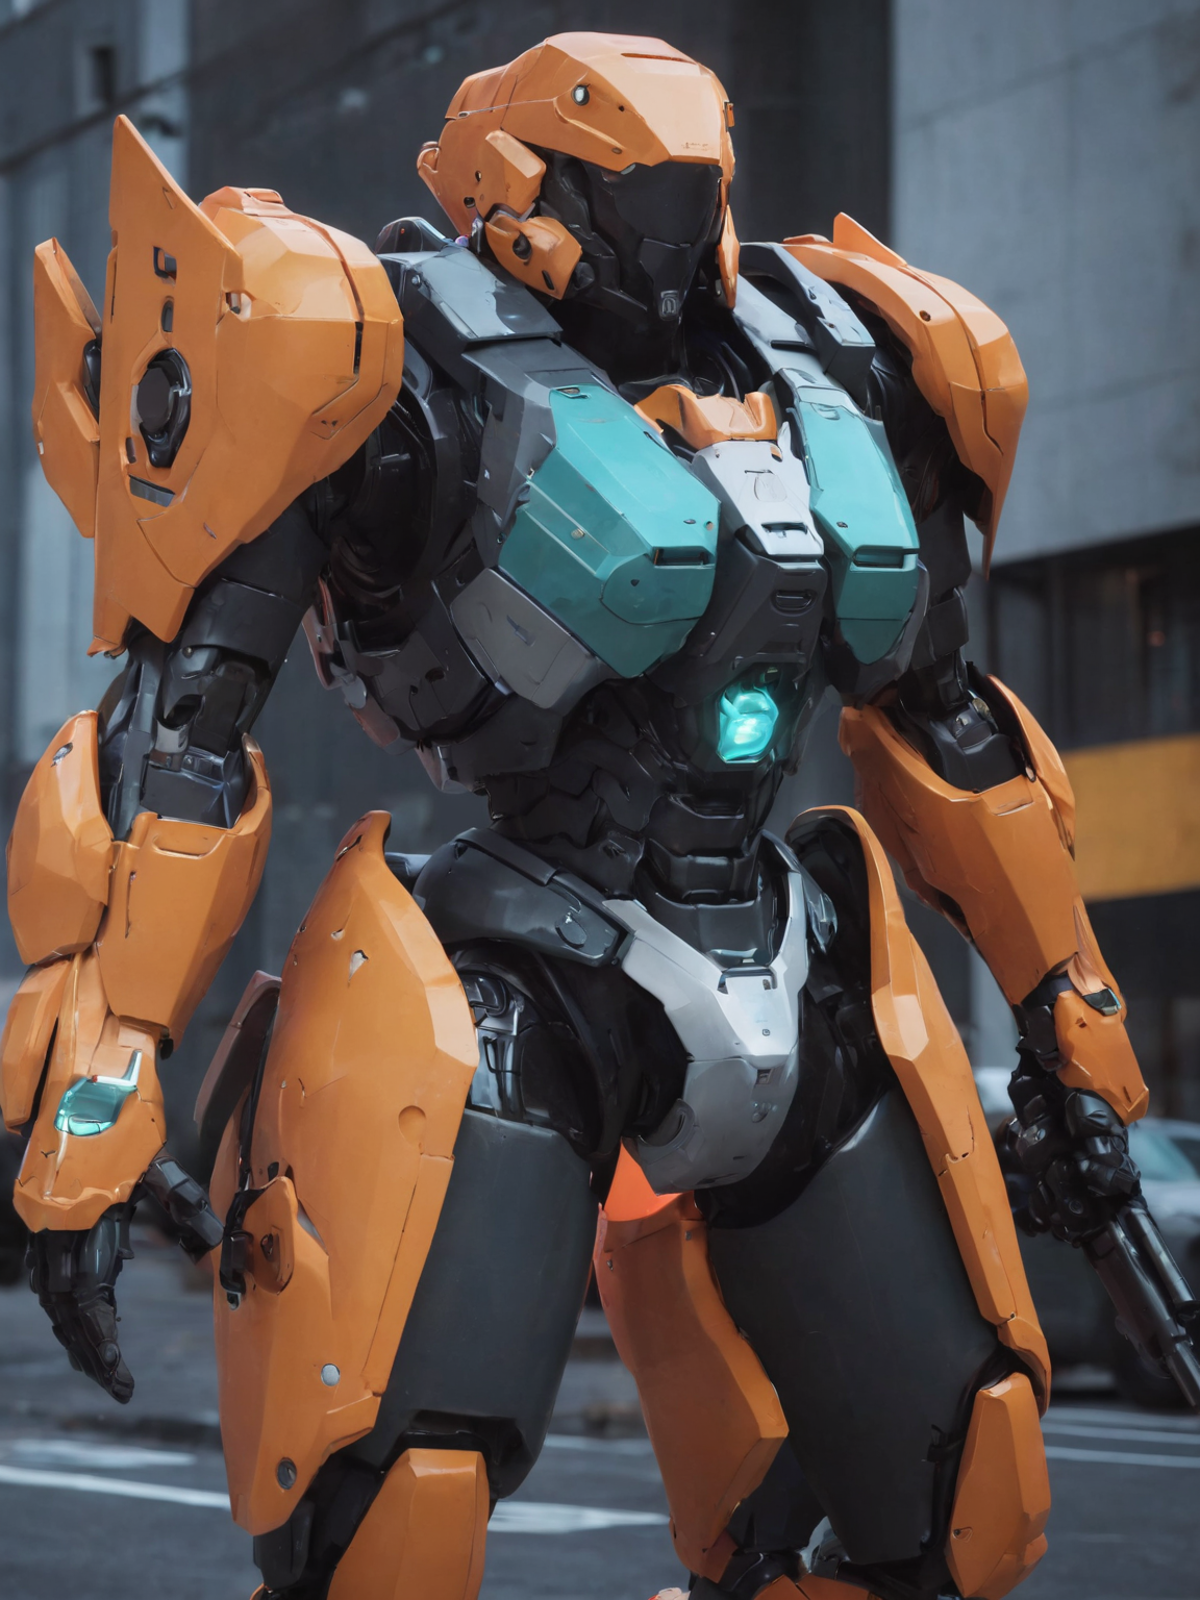 RFKTR's Hard Surface image by superskirv